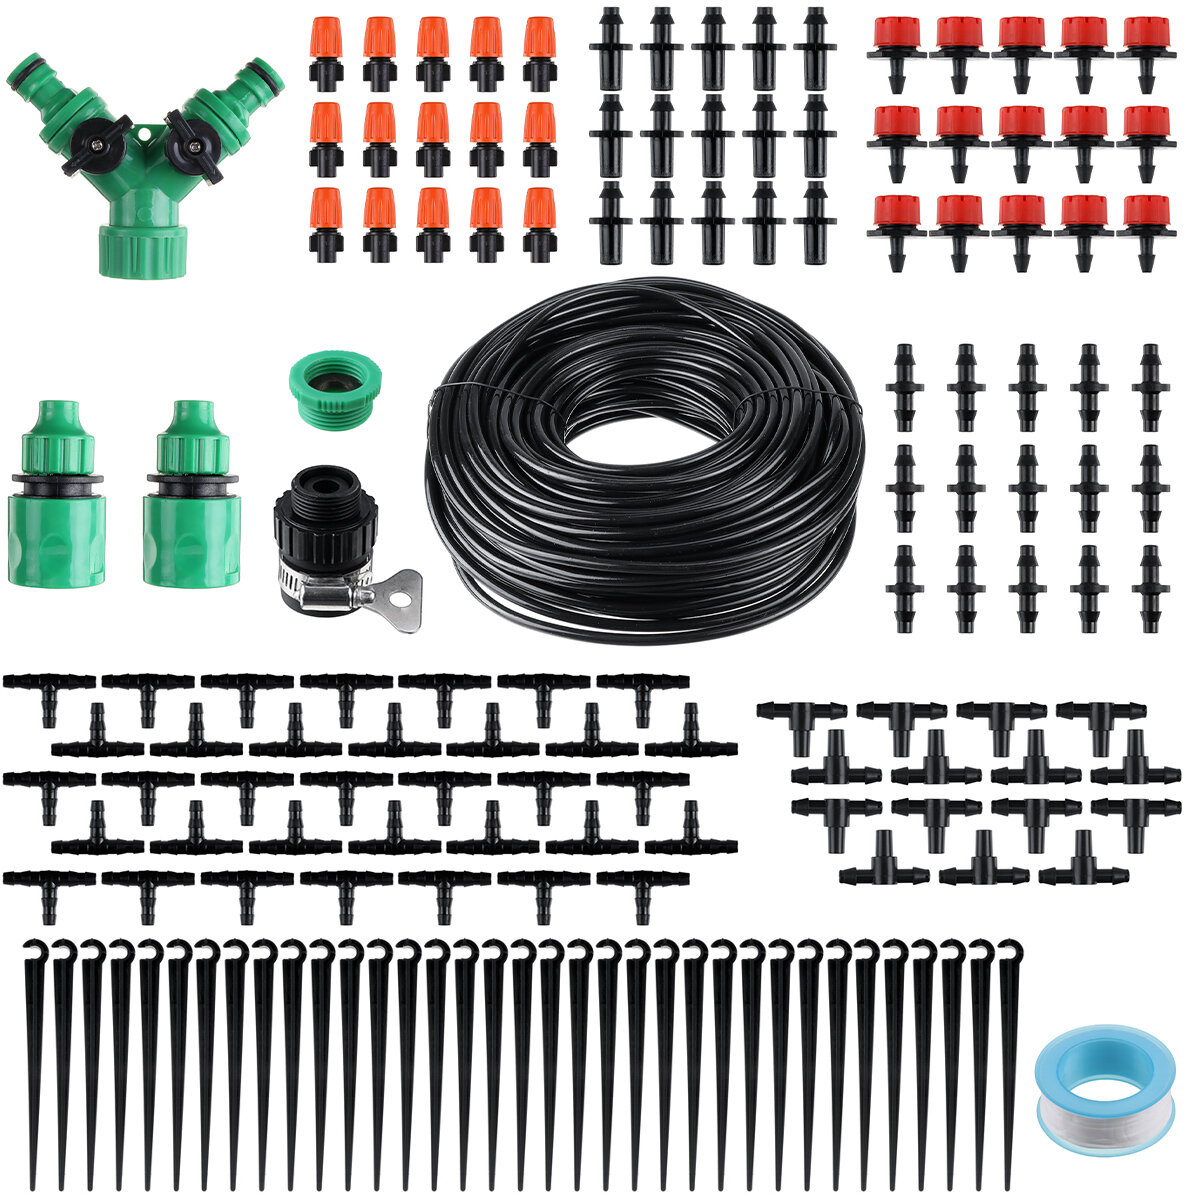 Image of 40m Manual Automatic DIY Micro Drip Irrigation System Auto Manual Timer Plant Watering Garden Hose Tool Set